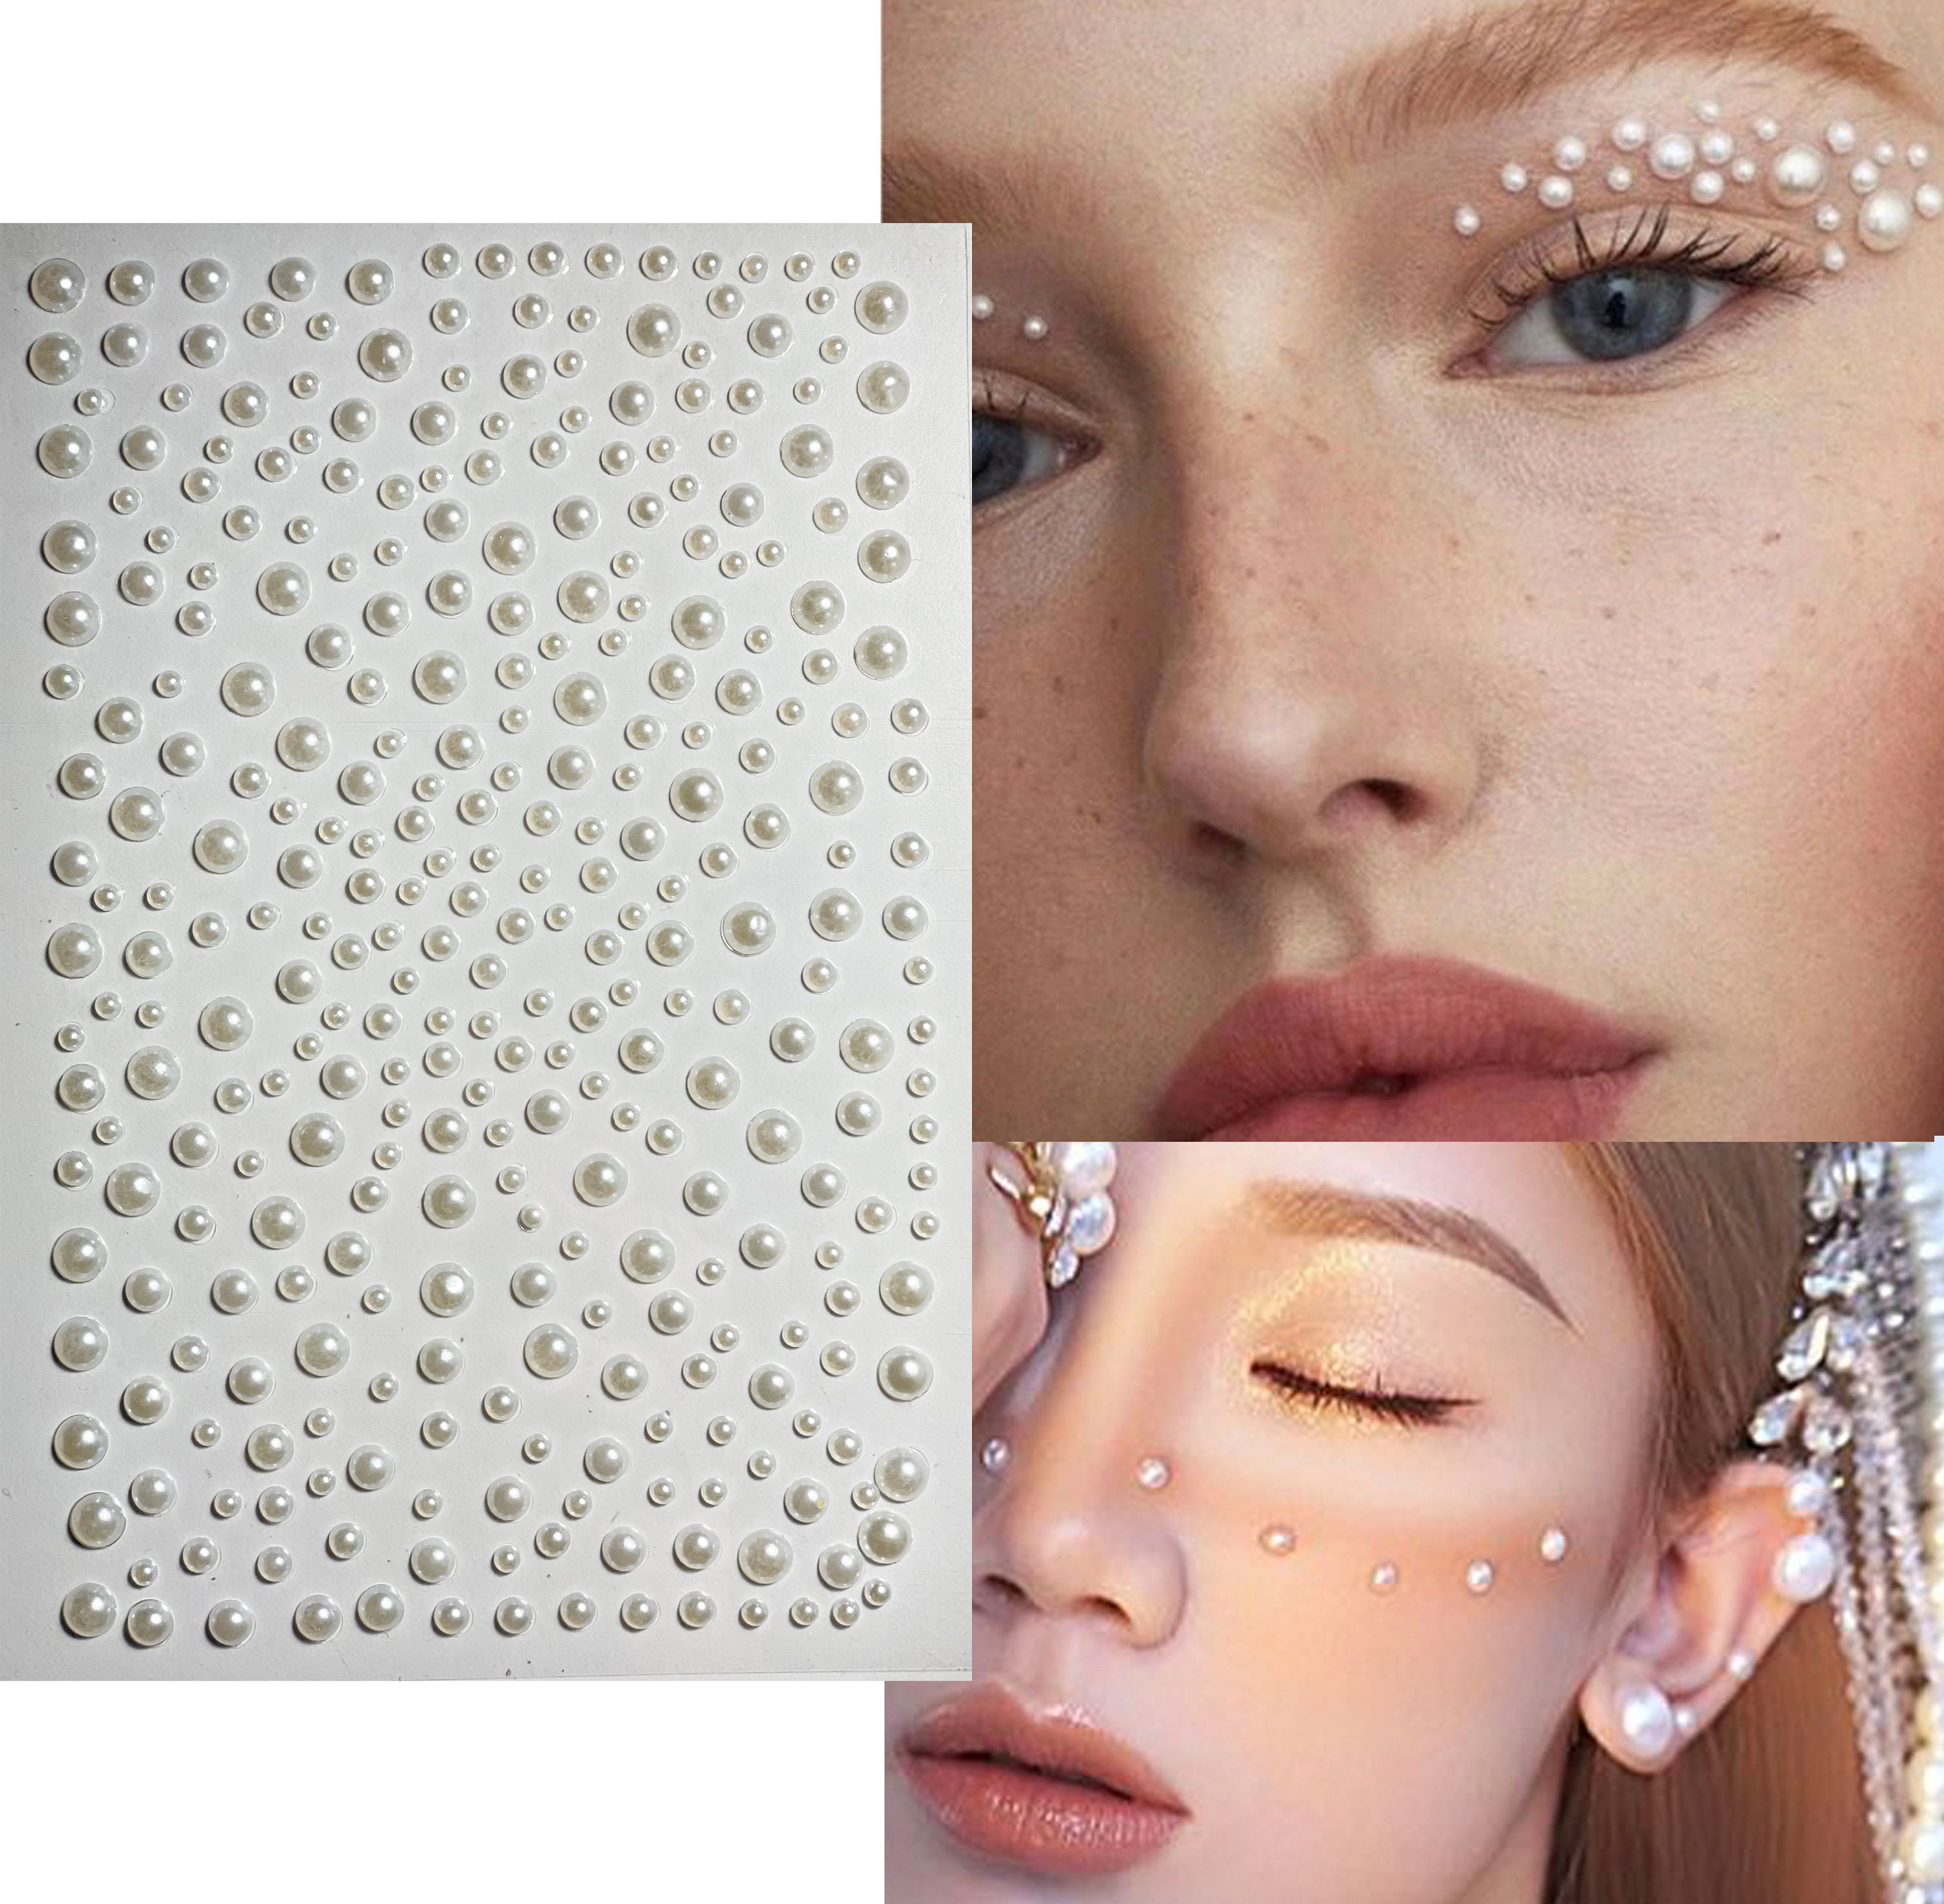 Hair Pearls Stickers Stick On: Face Self Adhesive Hair Eye Gems Accessories Pearl Sticker Stamper for Wedding Bride Makeup Nail Cell Phone Decor